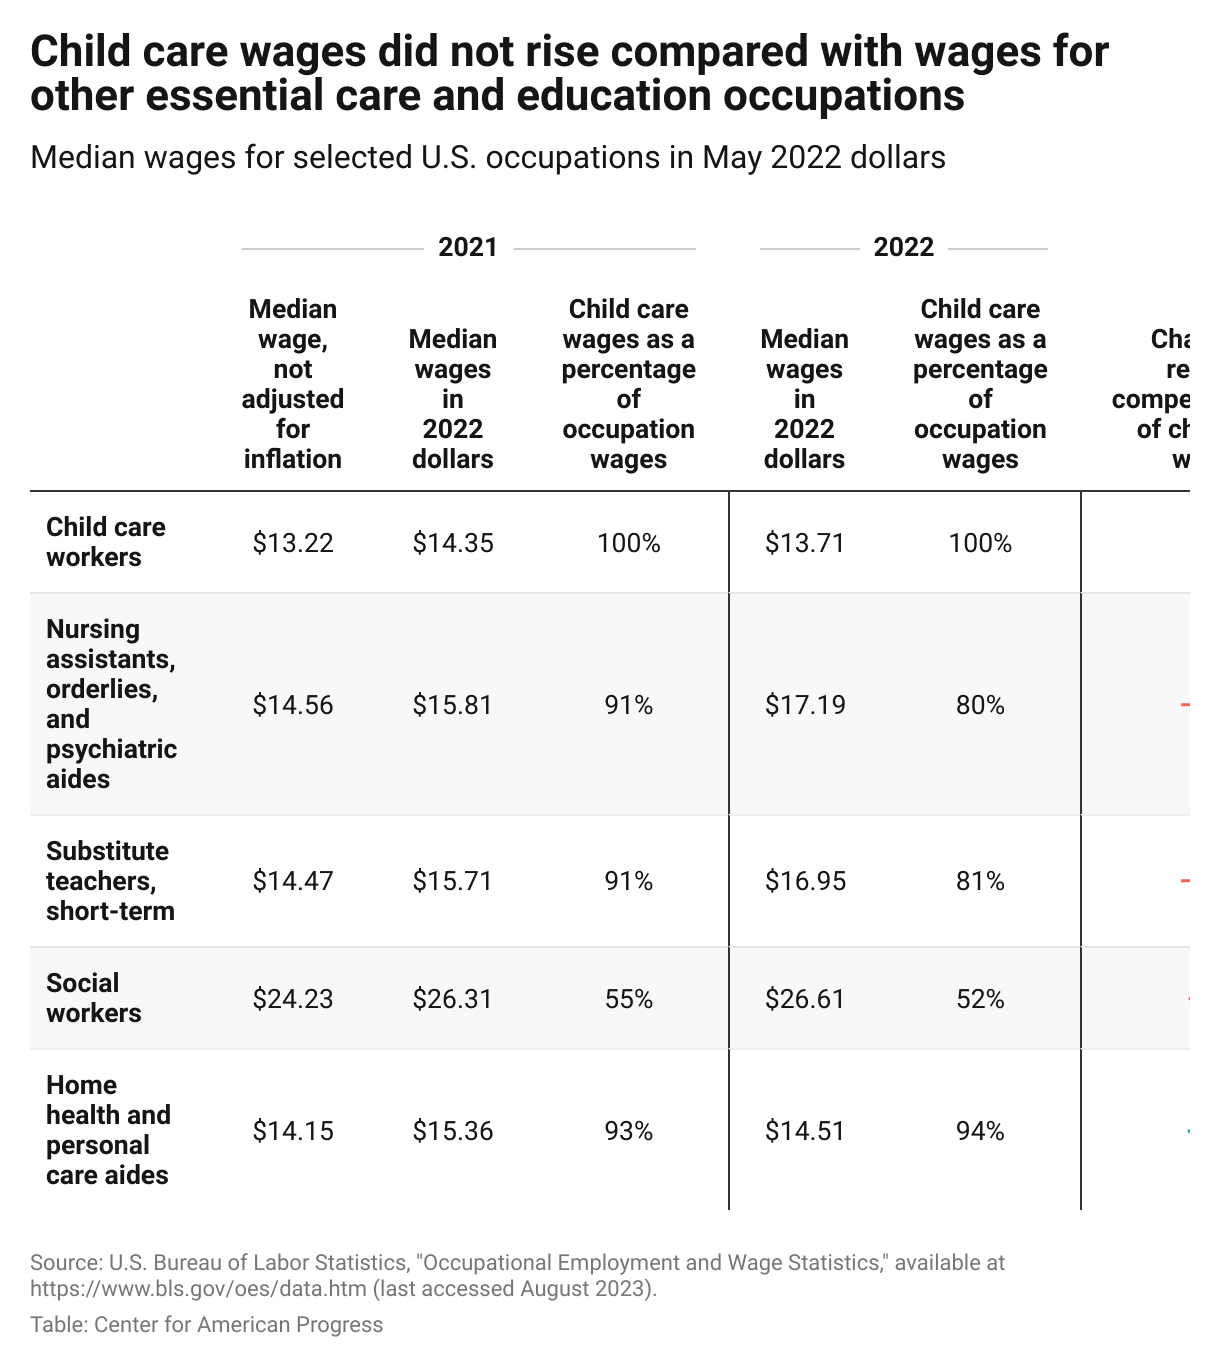 Comparing 2021 and 2022 wages for several care and education occupations shows that child care is not competitive.